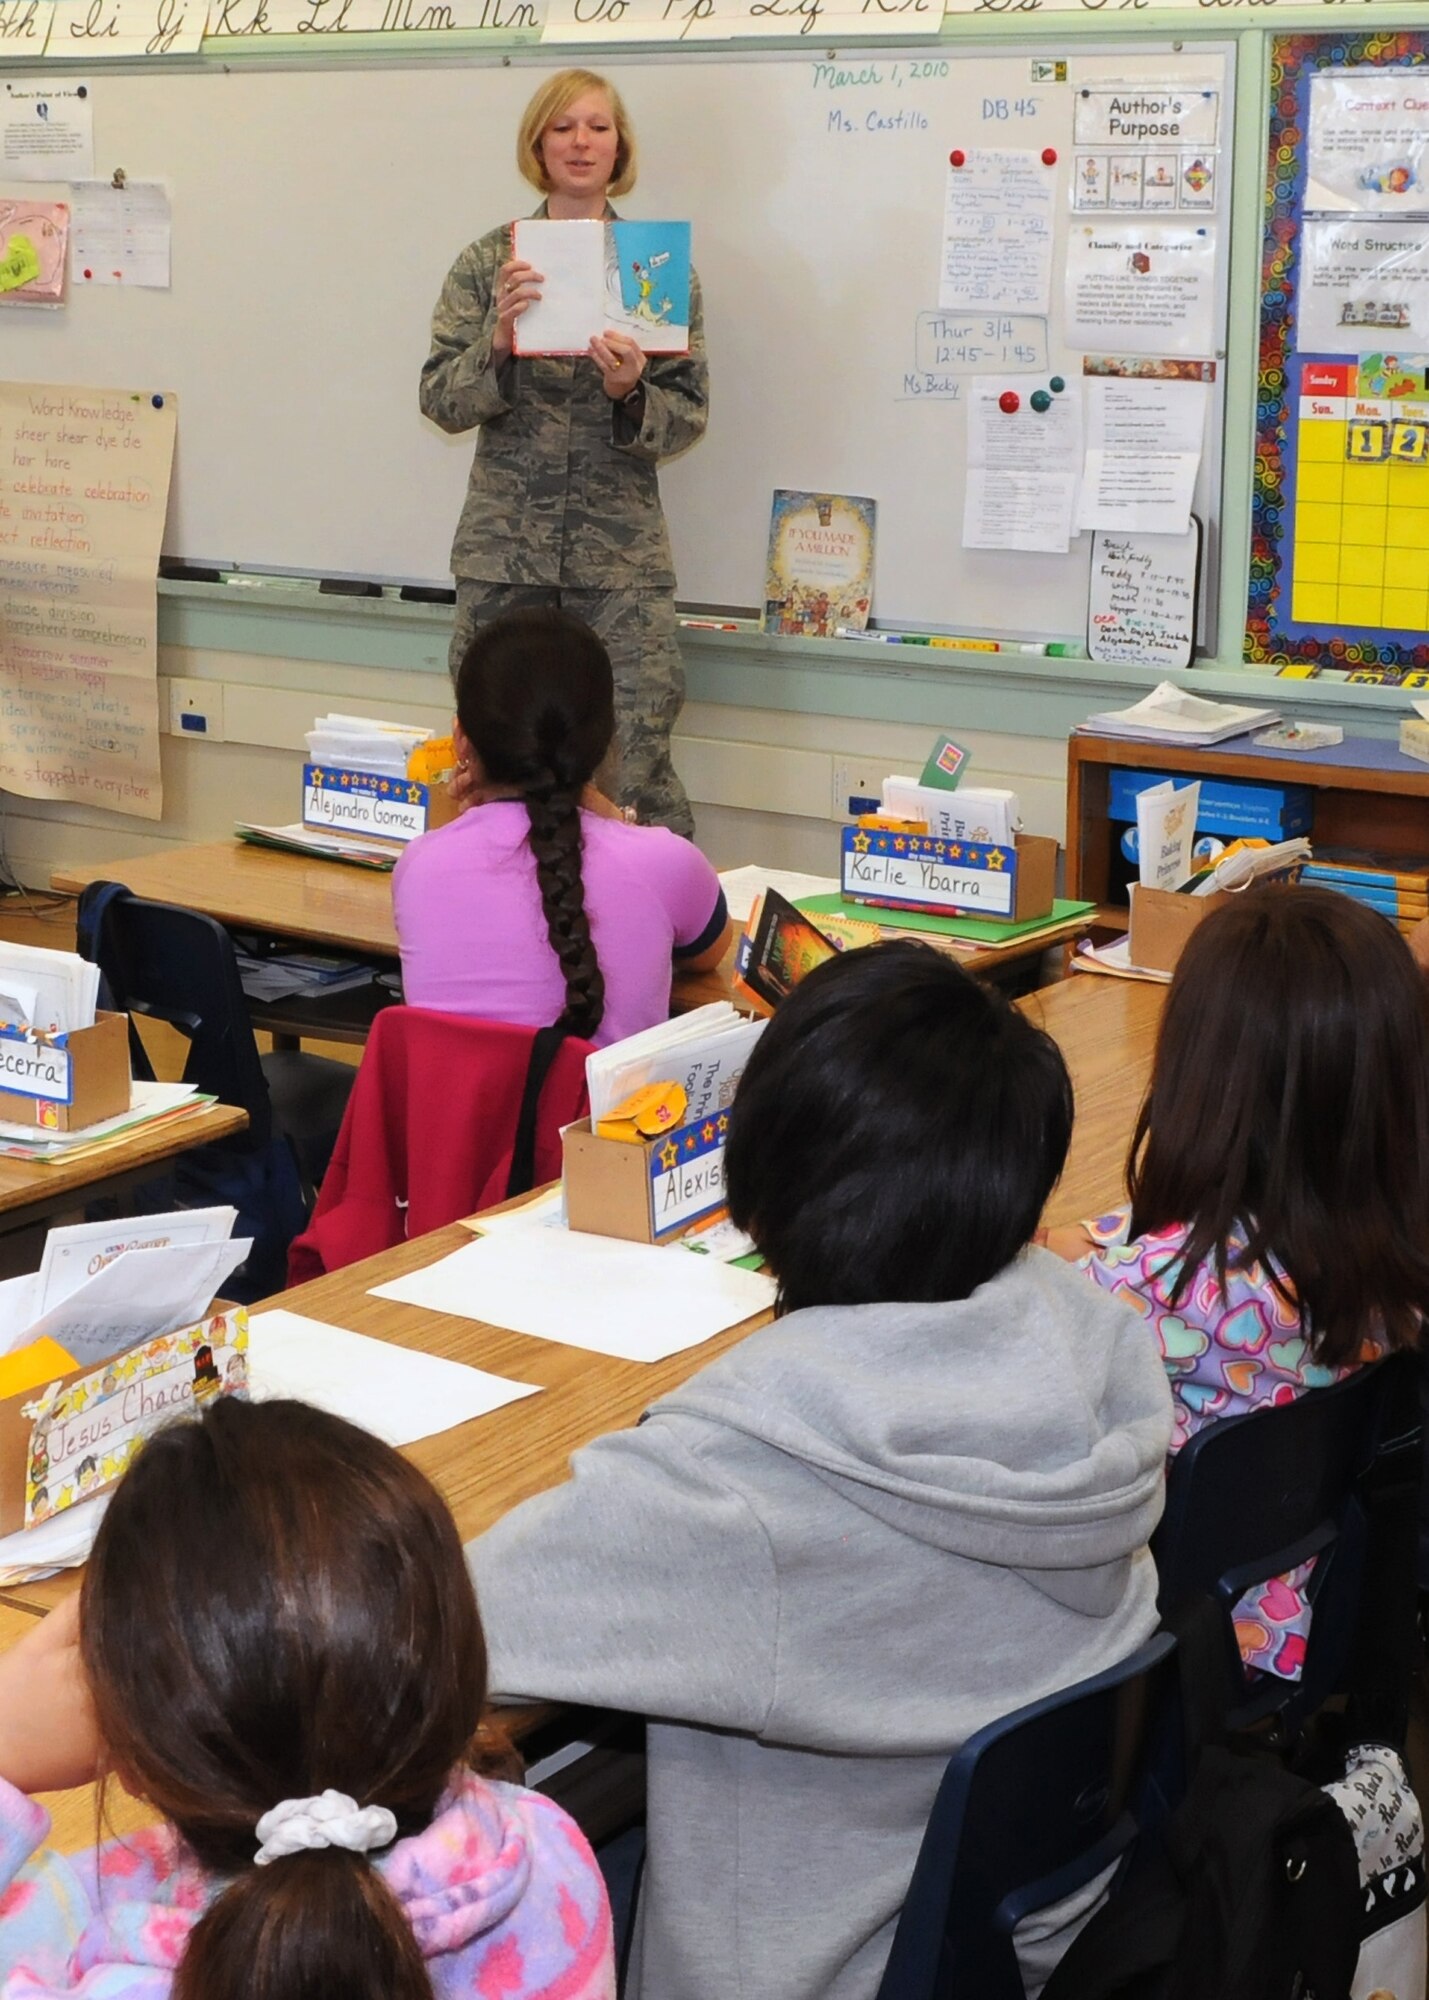 Capt. Dawn Cecil reads to a class of students during the Read Across America event at Lomita’s Eshelman Avenue Elementary School, March 2.  Approximately 10 LAAFB personnel read to the students.  Held every year in honor of Dr. Seuss’ birthday, Read Across America events promote children’s literacy.  (Photo by Jim Gordon)